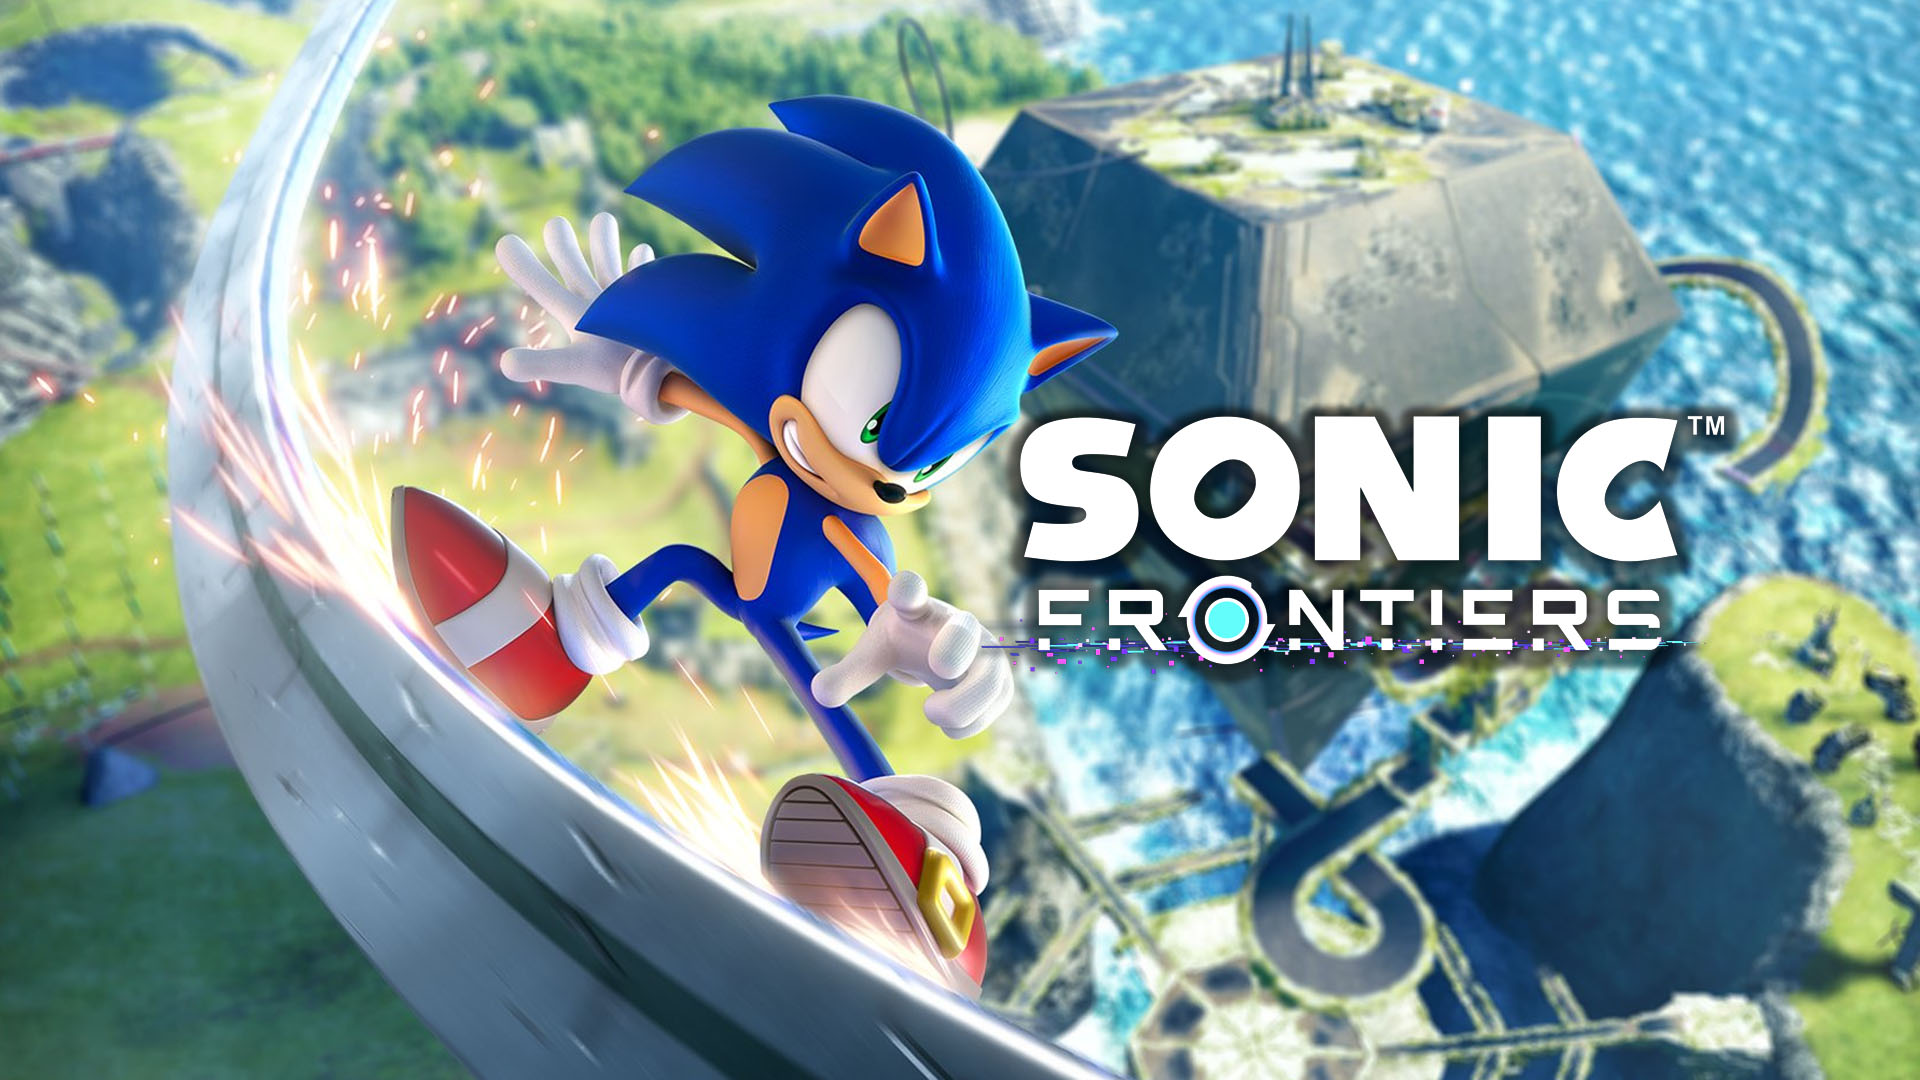 Sonic Frontiere 12 02 22 1